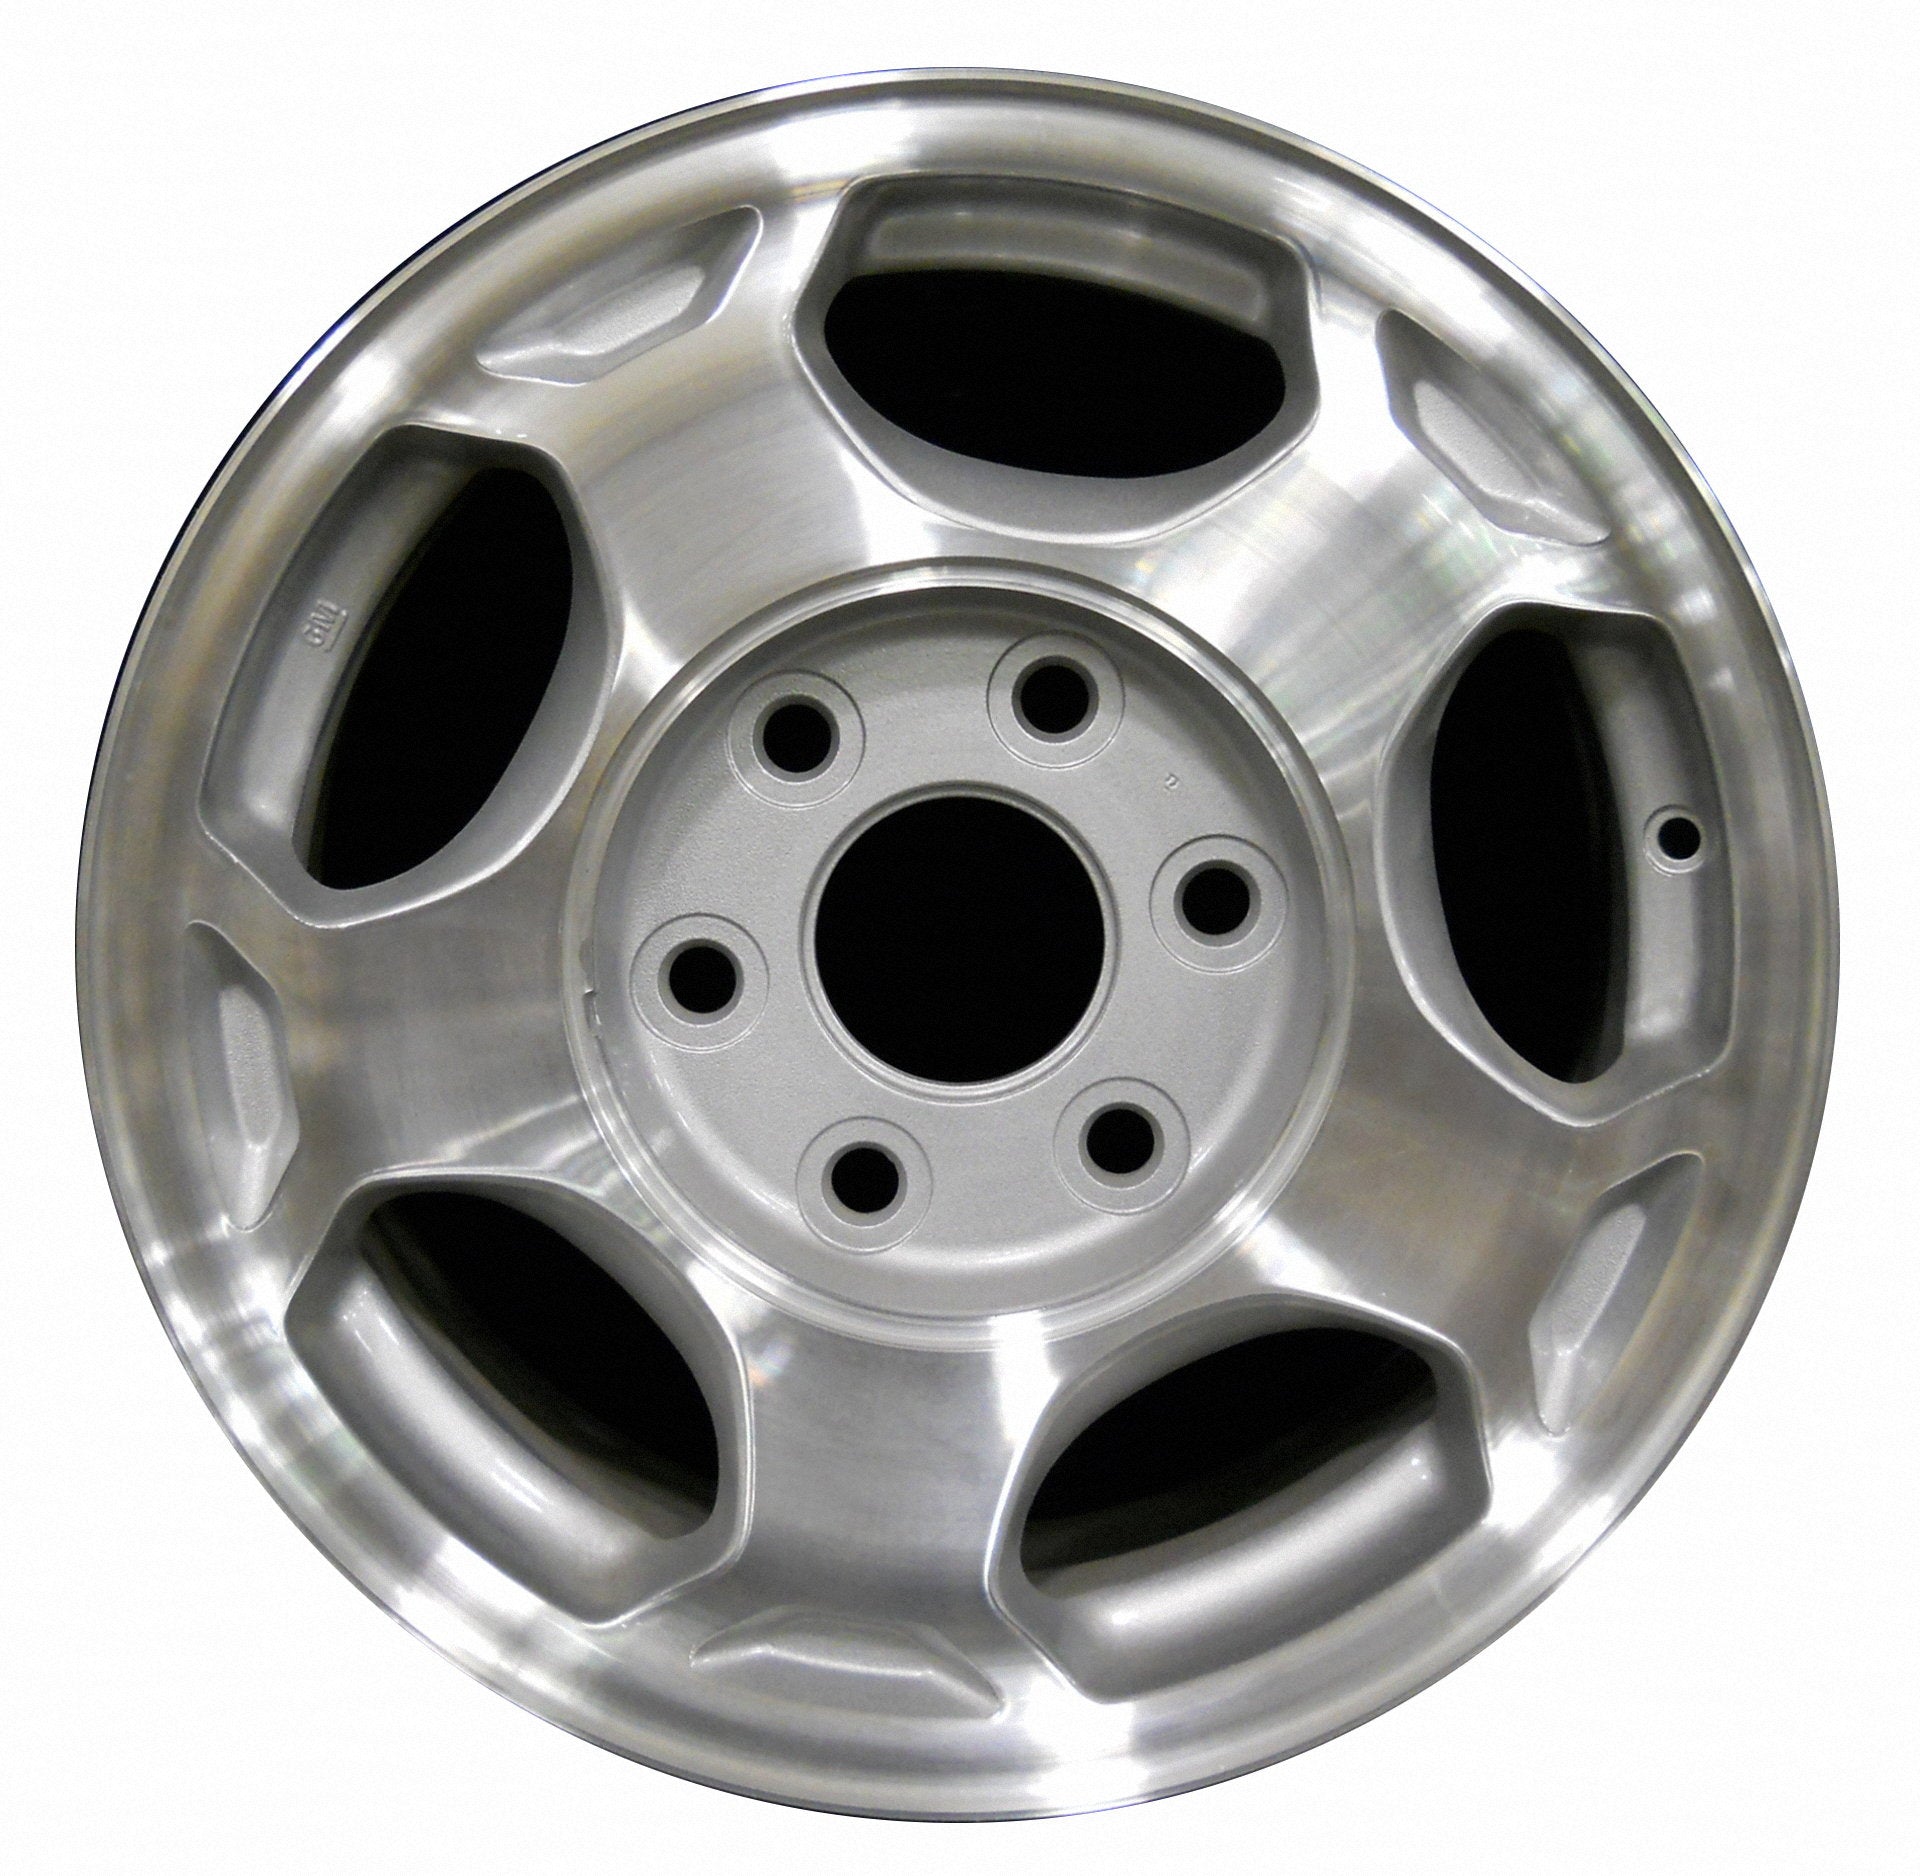 Chevrolet Avalanche  2002, 2003, 2004, 2005, 2006 Factory OEM Car Wheel Size 16x7 Alloy WAO.5154.PS02.MA